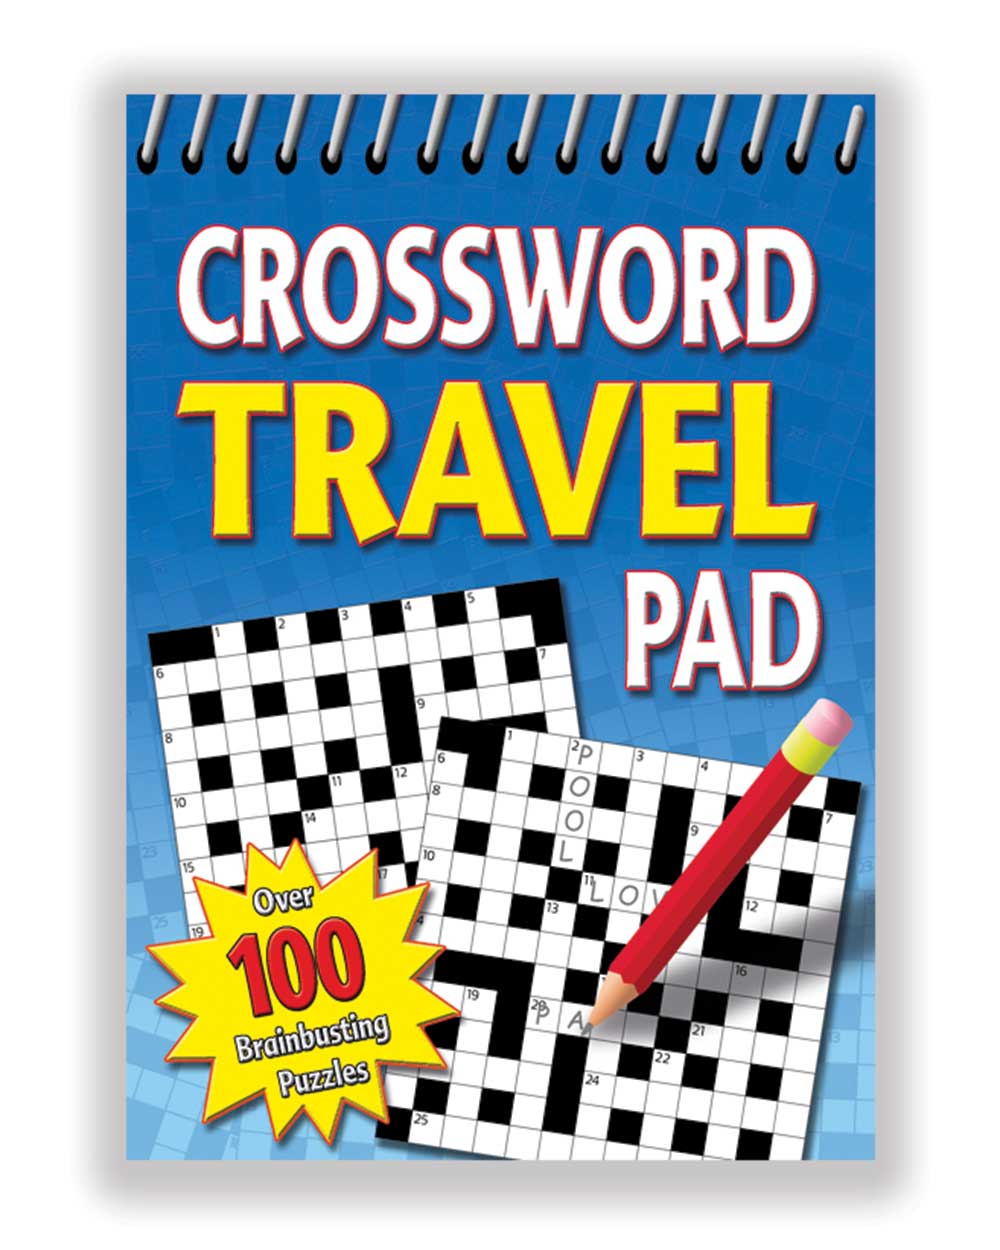 Crossword Cross word travel pad on the go front cover